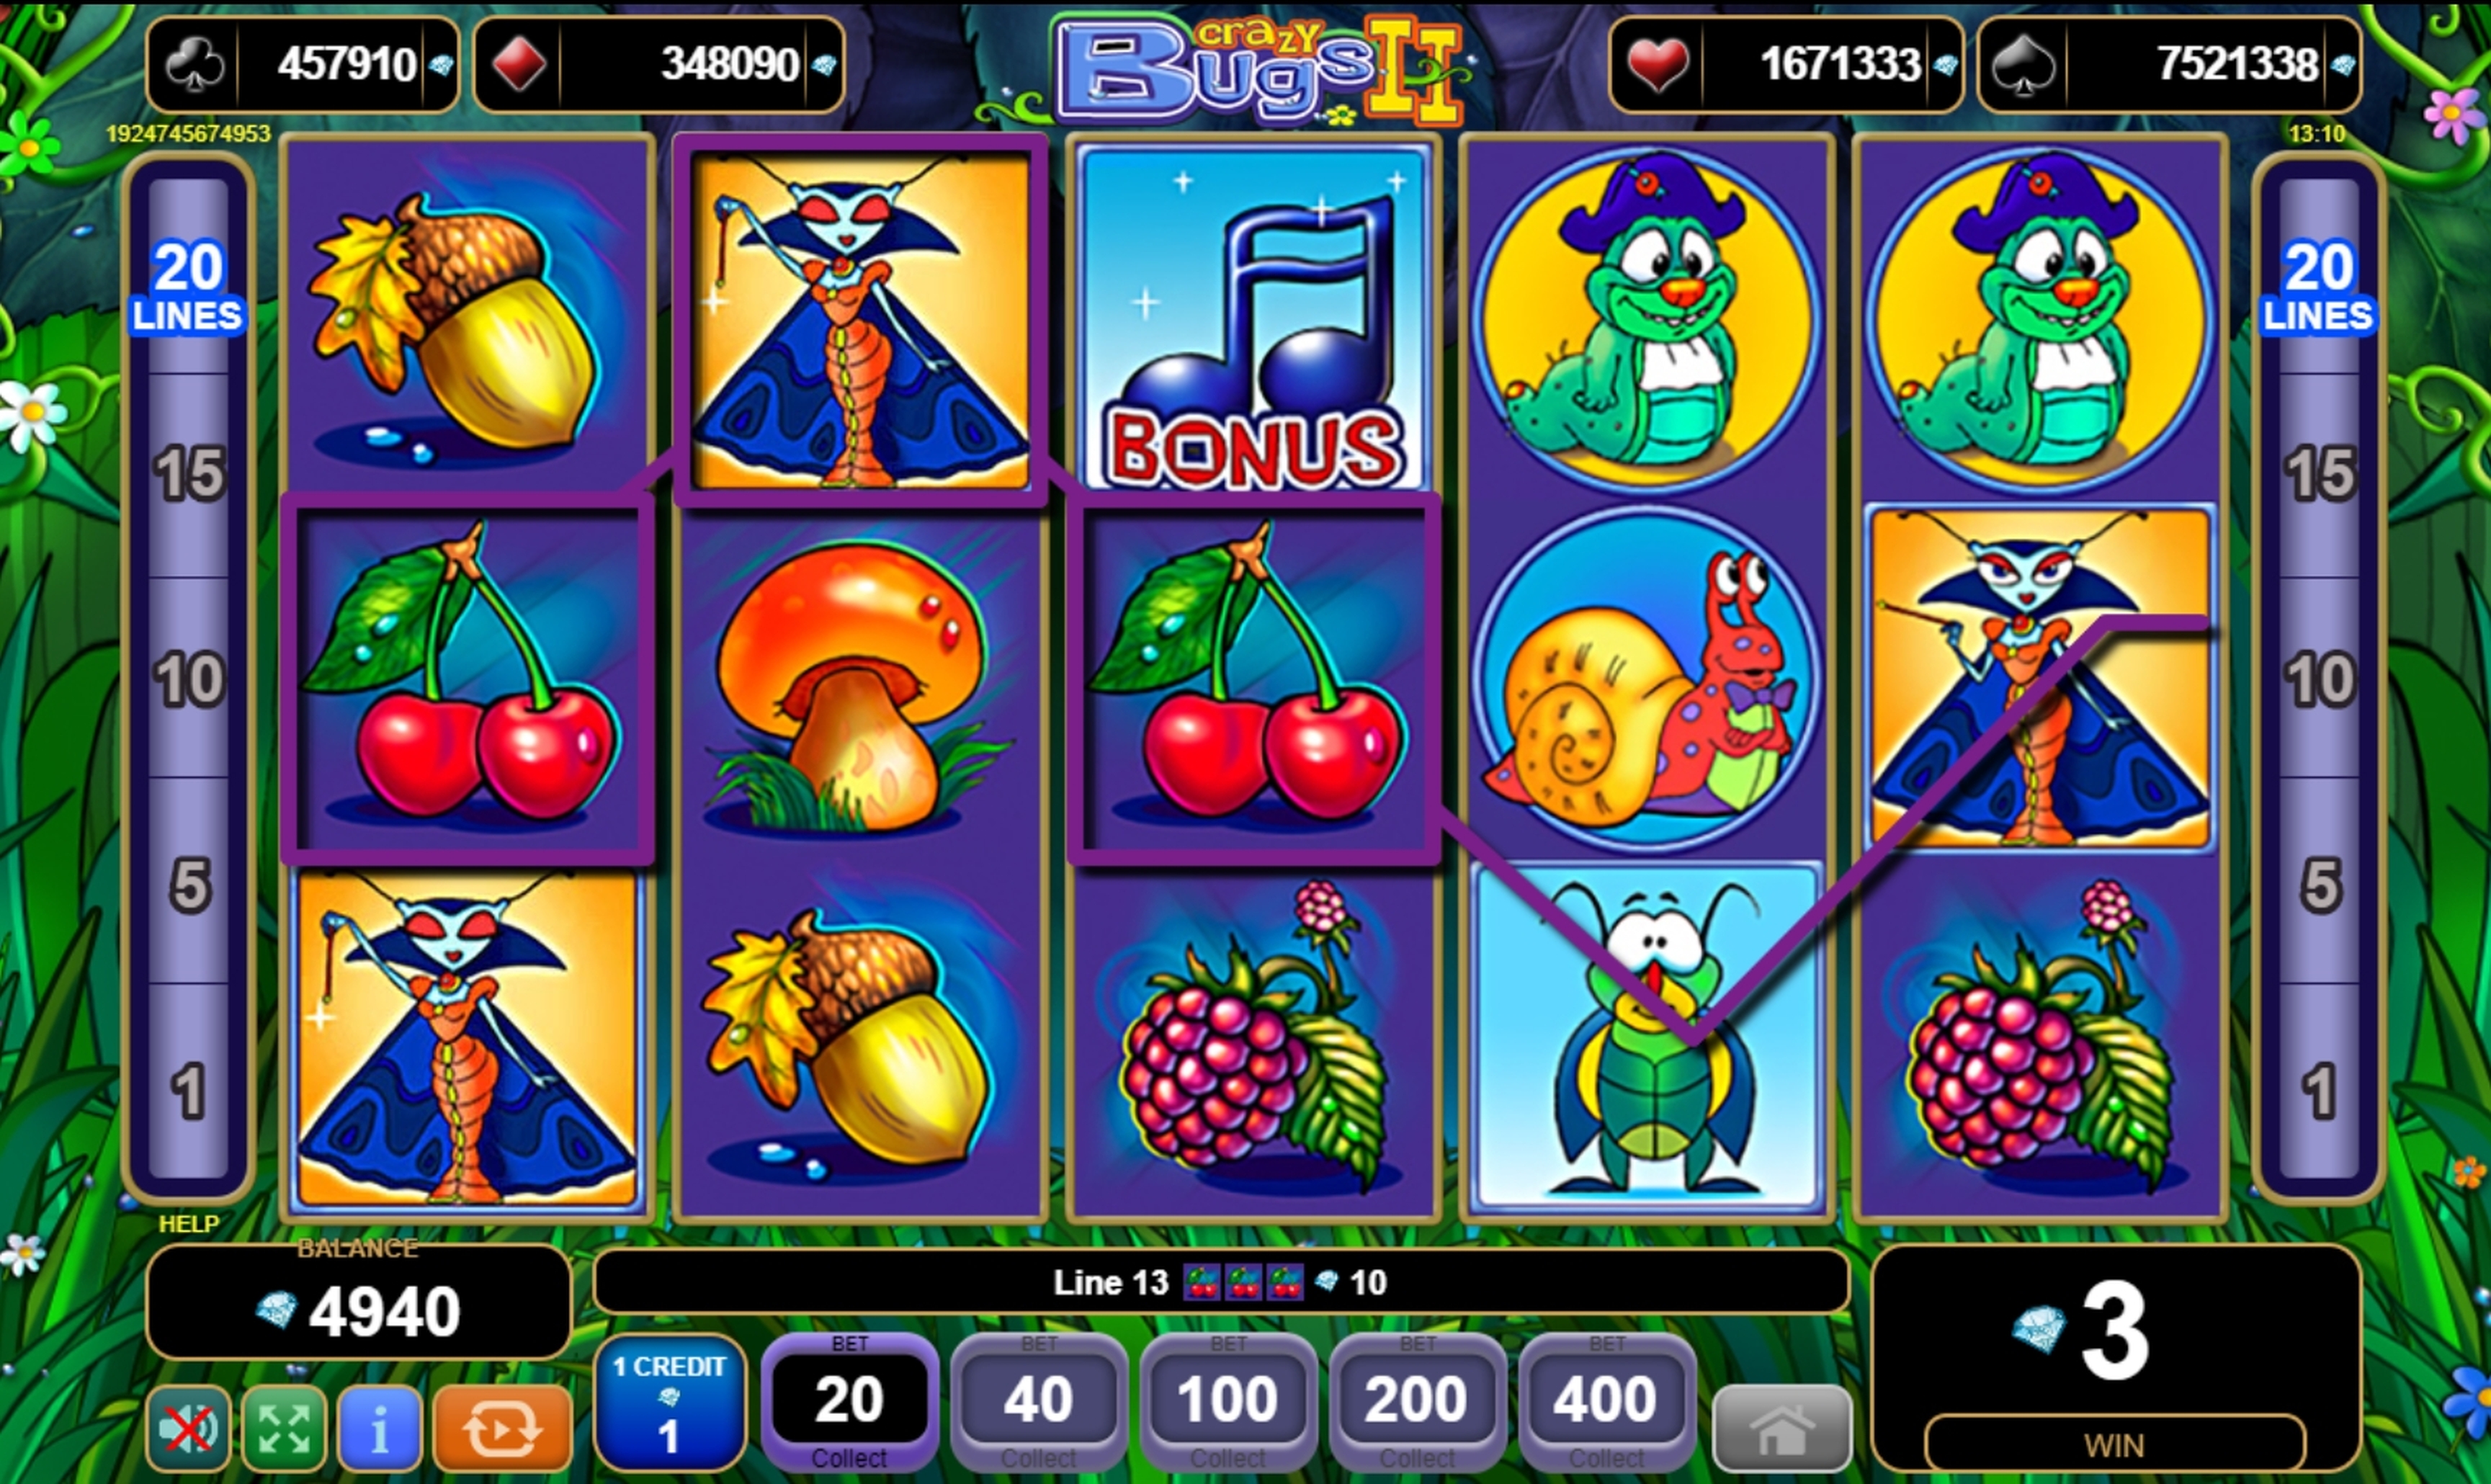 Win Money in Crazy Bugs II Free Slot Game by EGT